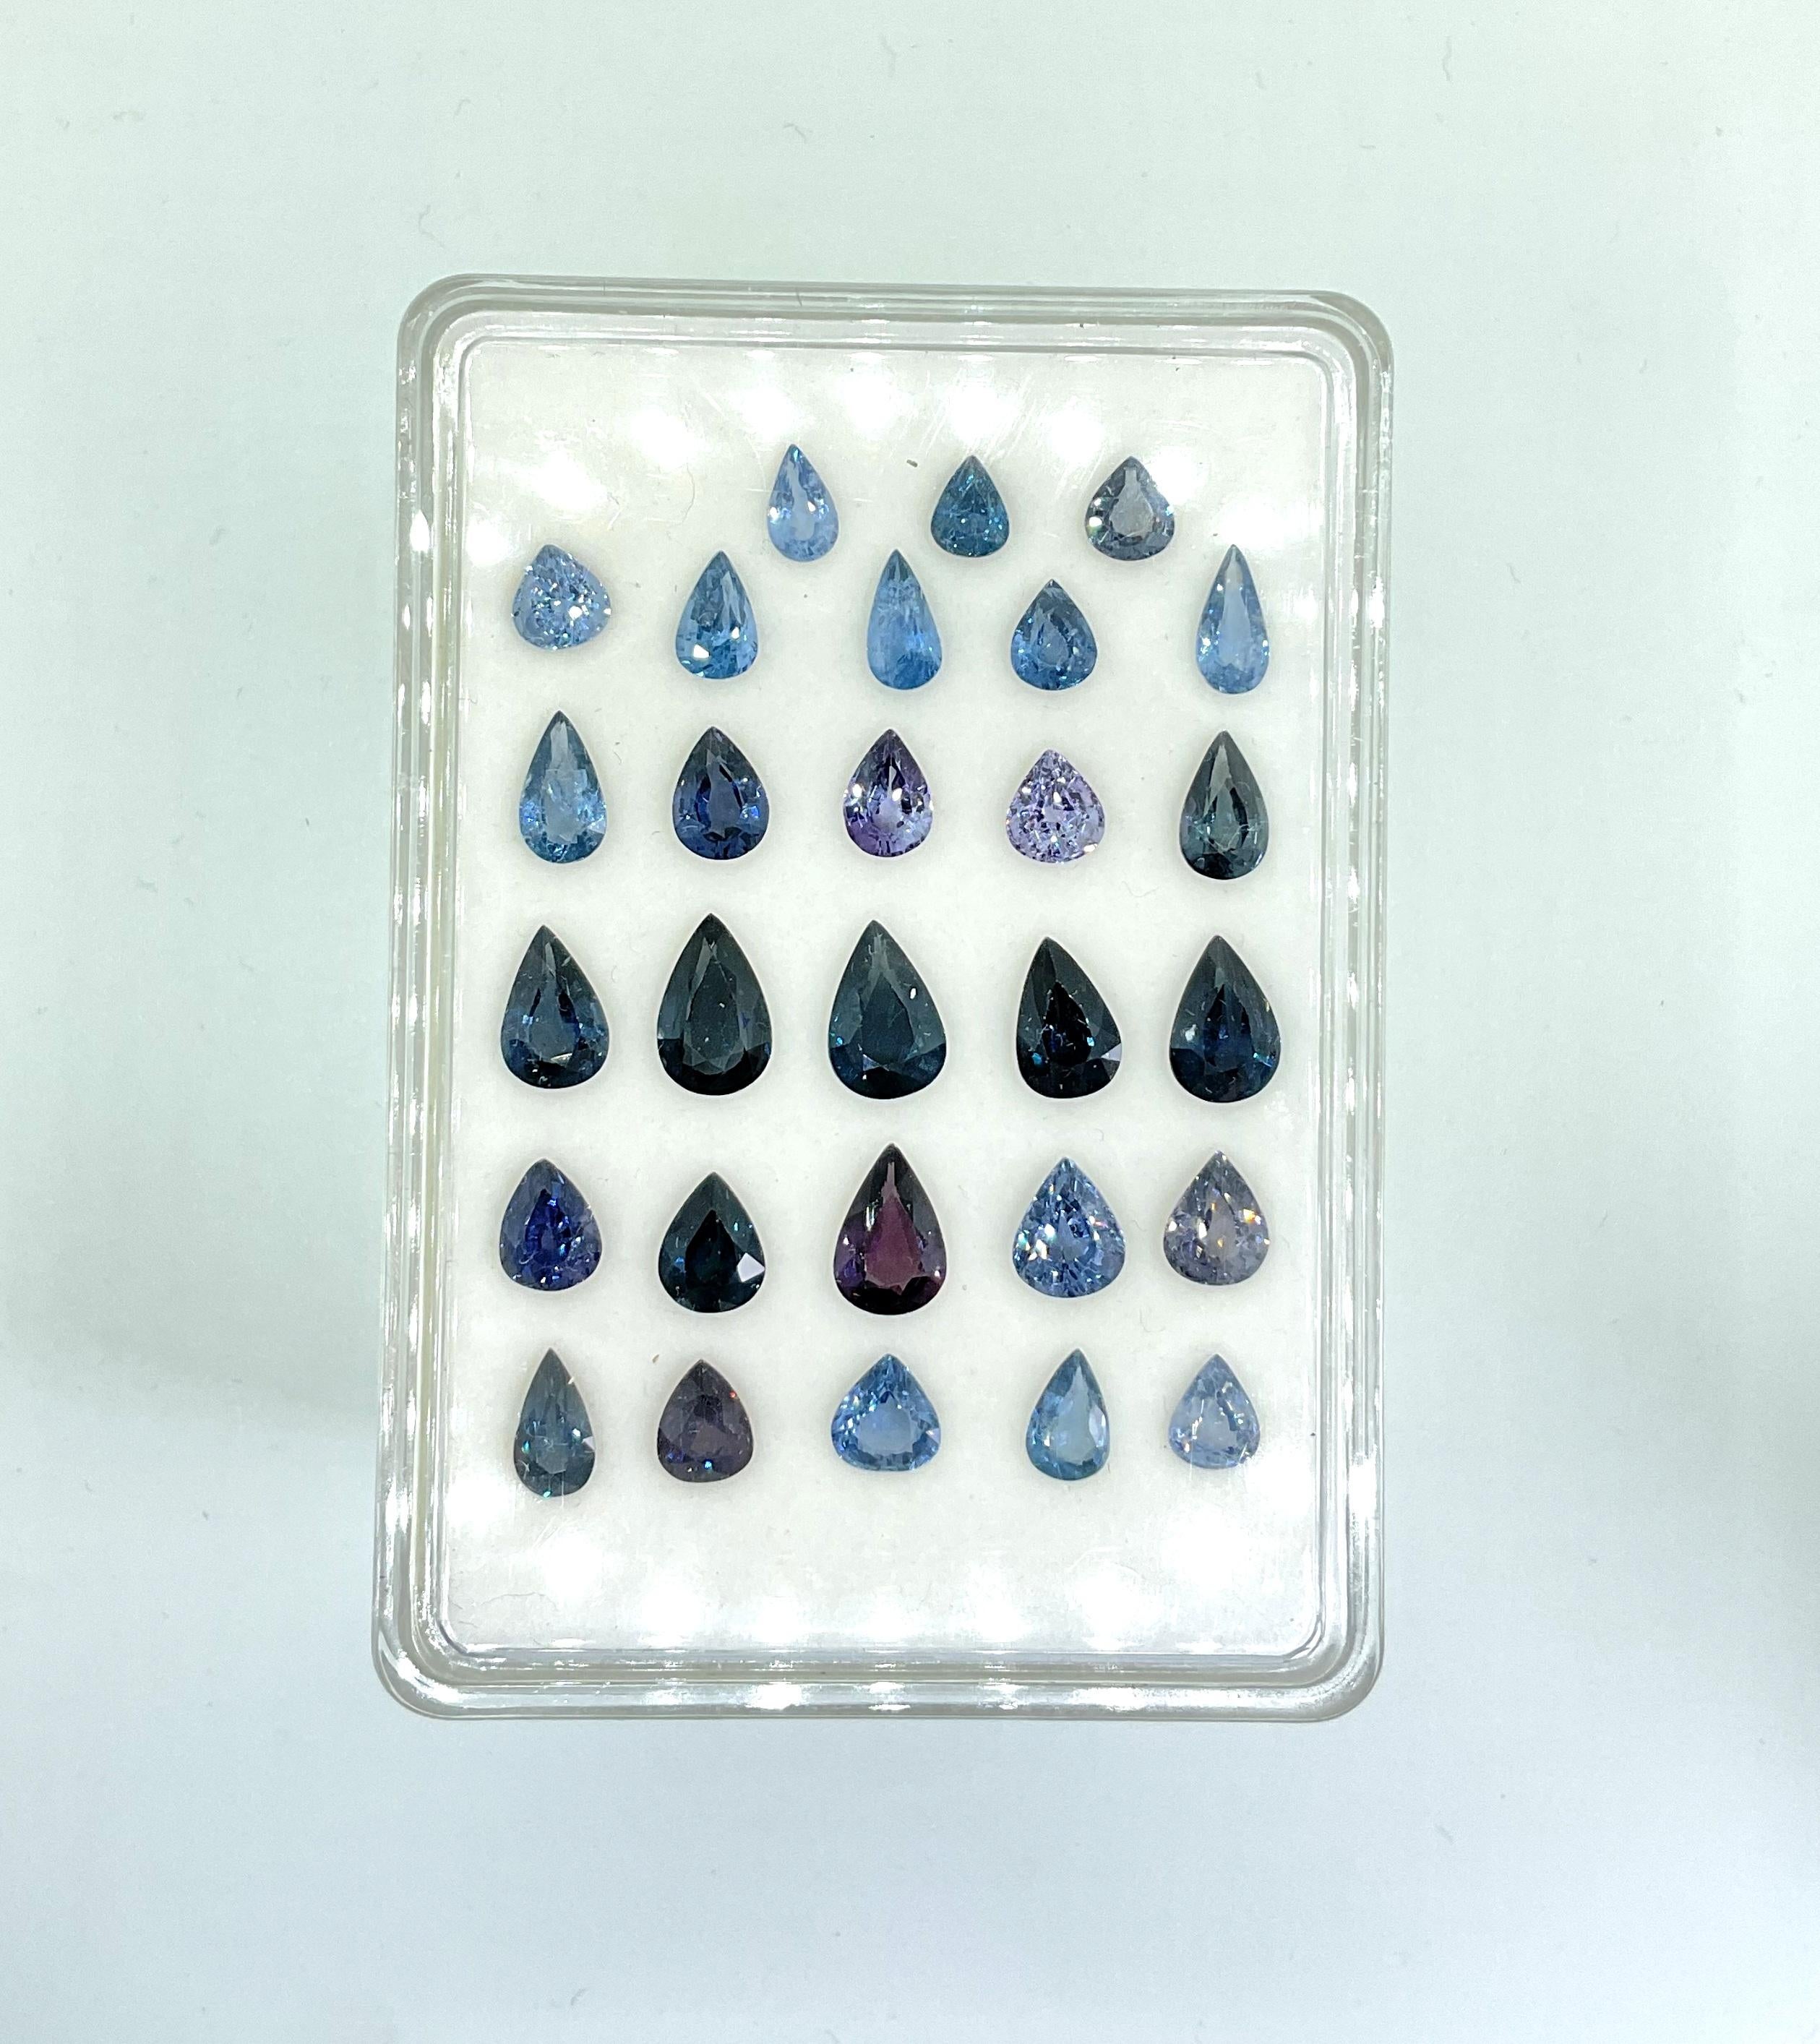 35.12 Carat Blue Spinel Tanzania Faceted Pear Cut stone For Jewelry Natural Gem

Weight - 35.12 Carats
Size - 6x5 To 7x11mm
Shape - Pear
Quantity - 28 Pieces